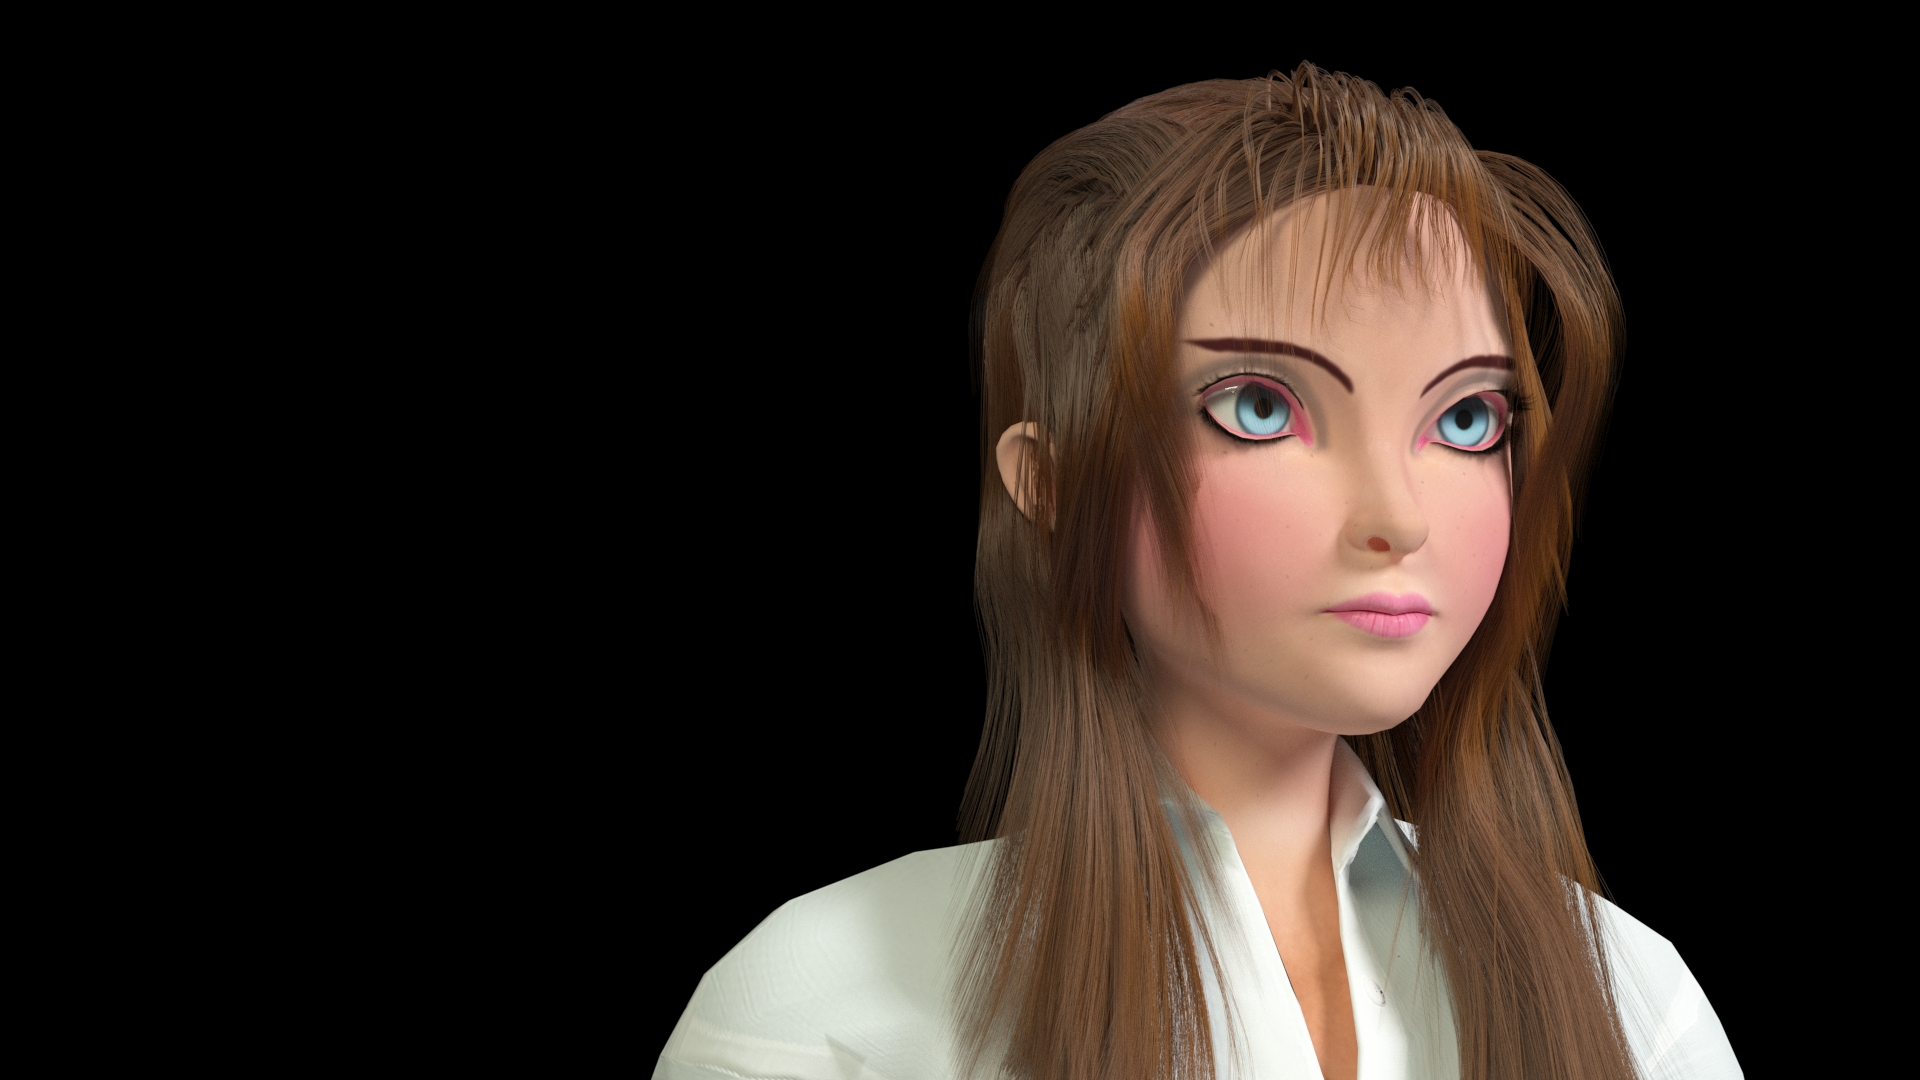 3D Character and 3D Animation Production Company